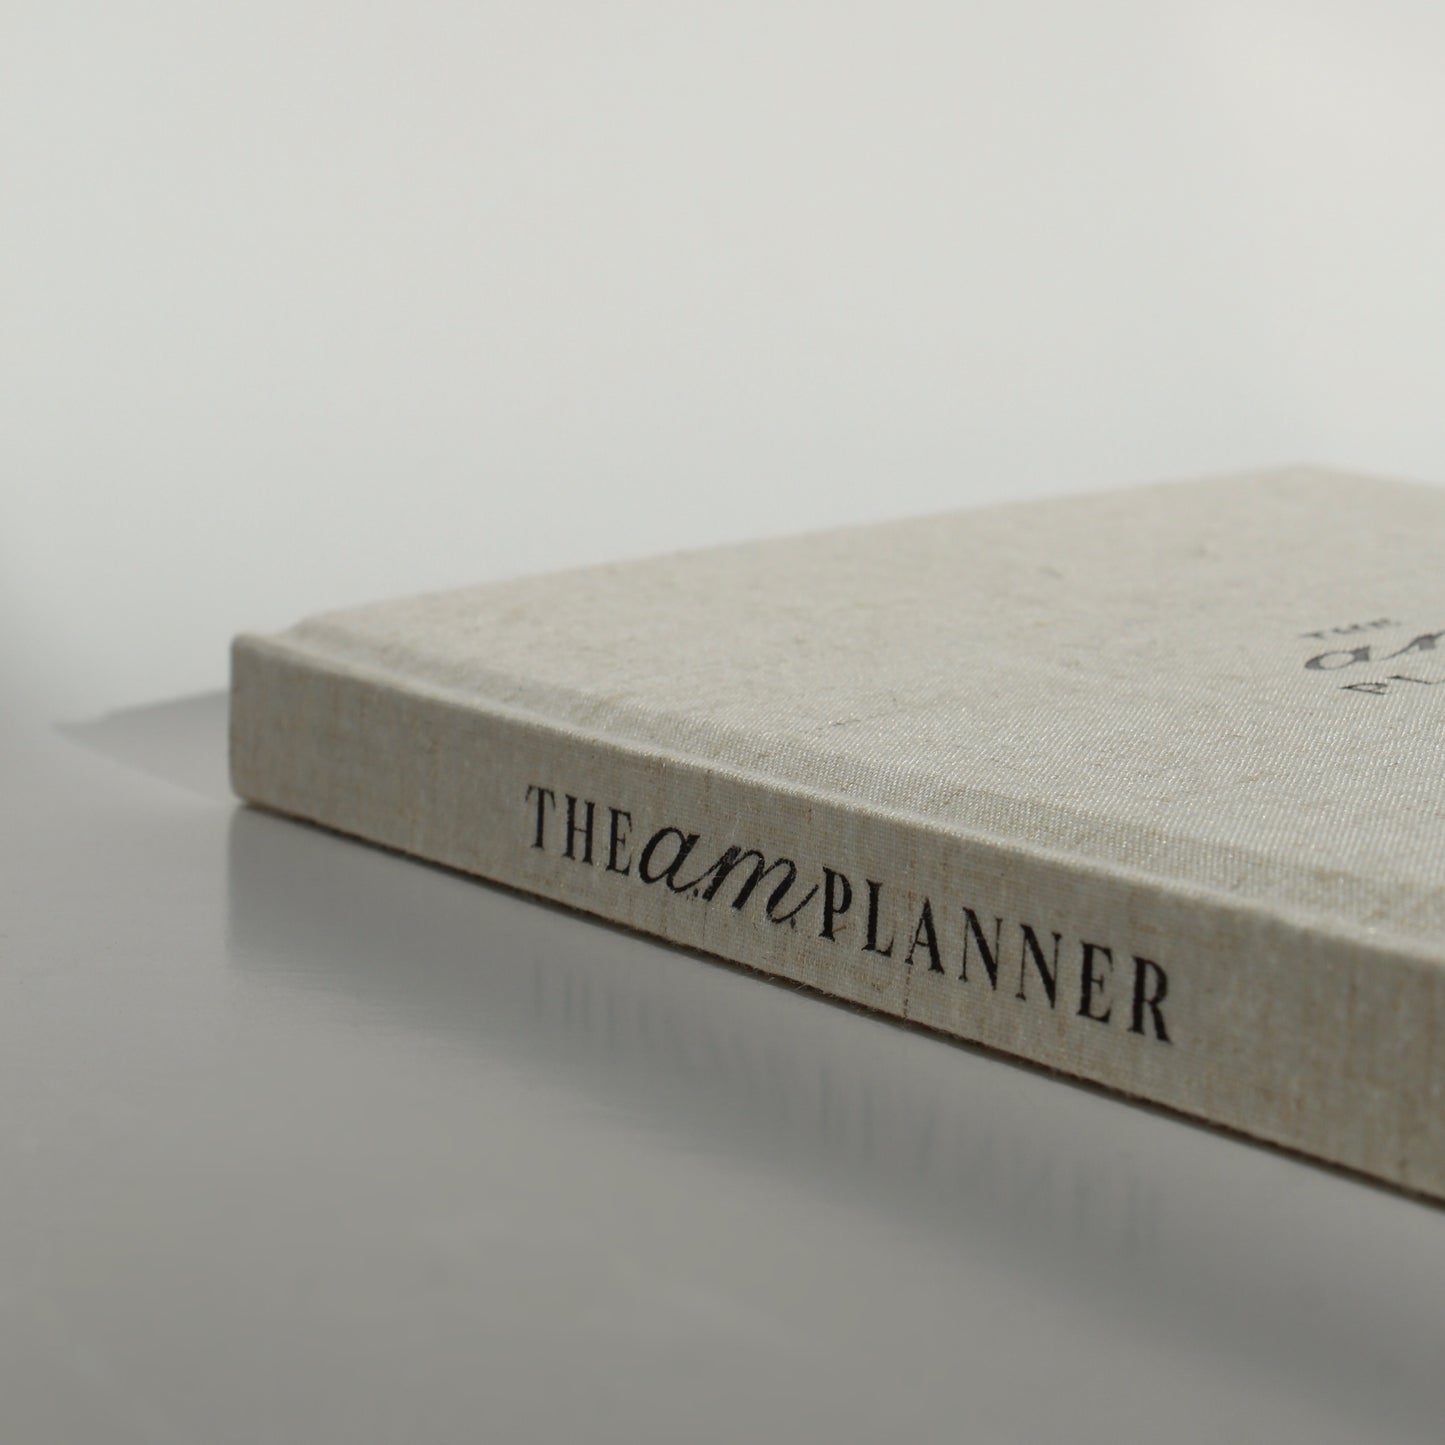 The a.m. planner